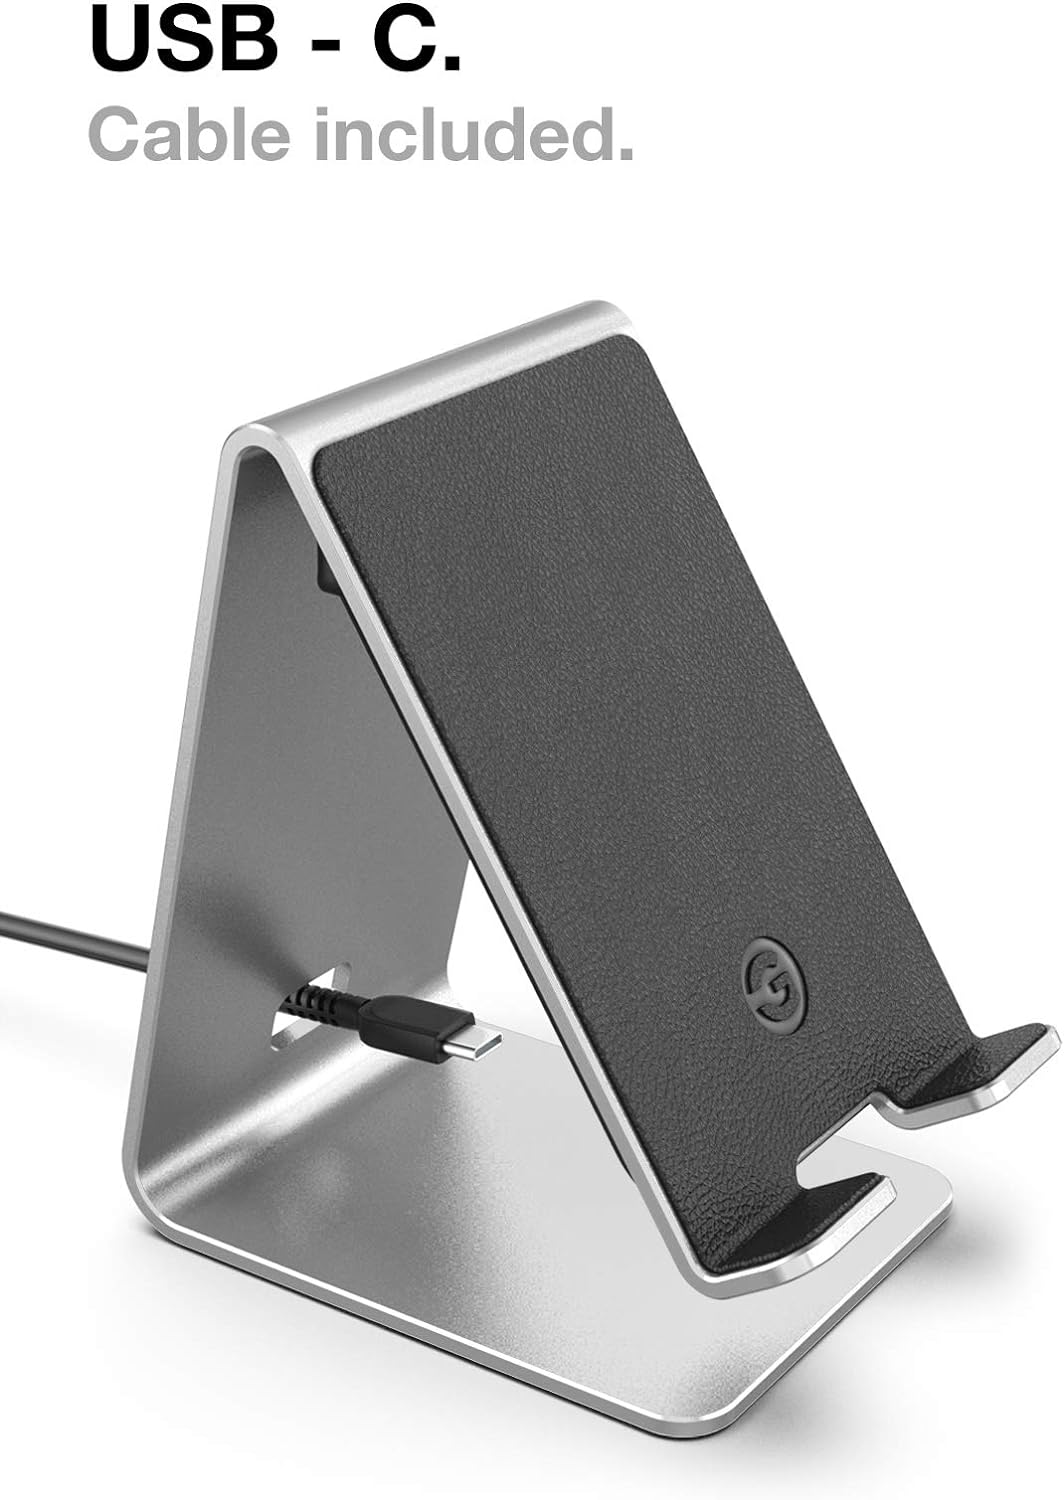 PowerStand Wireless Charging Stand with Dimmable LED Backlights - Desktop Charger for iPhone, Android and Galaxy Phone Models (Aluminum Silver)